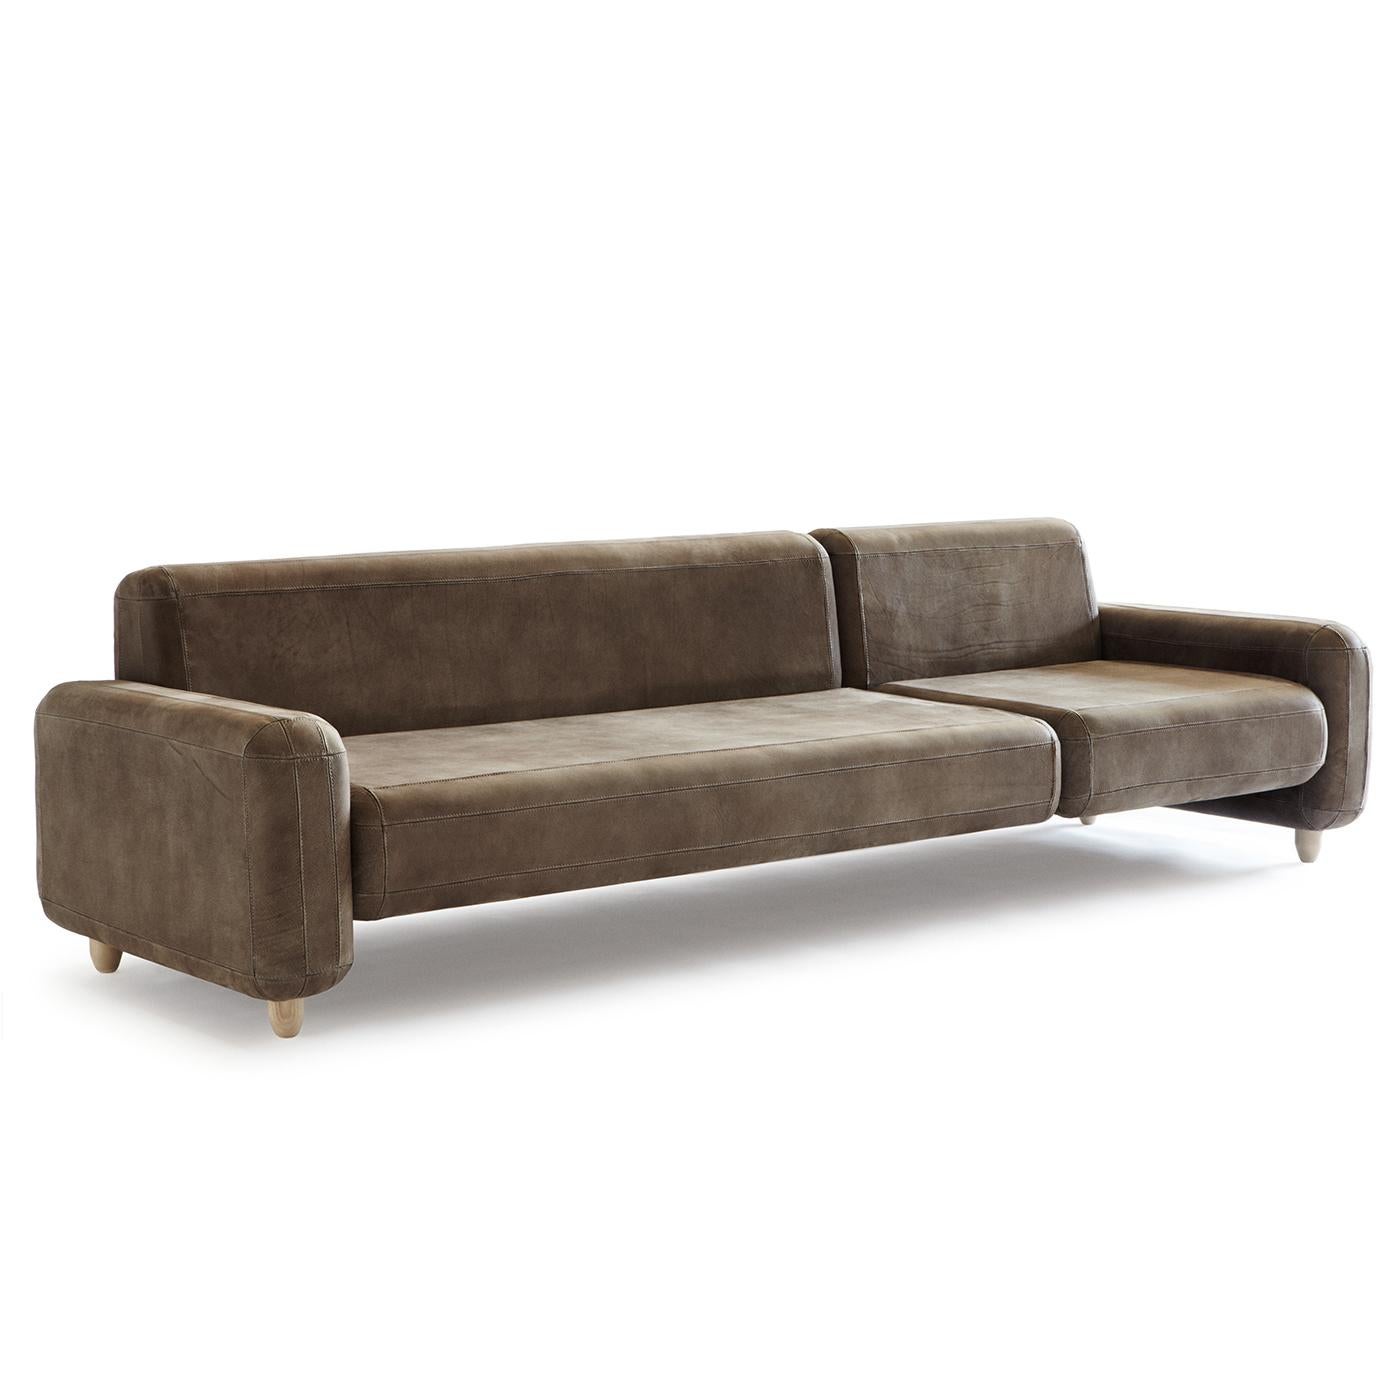 Nothing says understated luxury quite like this Traco Gray Leather Sofa. Sculpted, cool and modern, it provides a wow effect to any setting, whether private or public. The clean lines and visible stitching enhance it’s perfect shape. With a frame